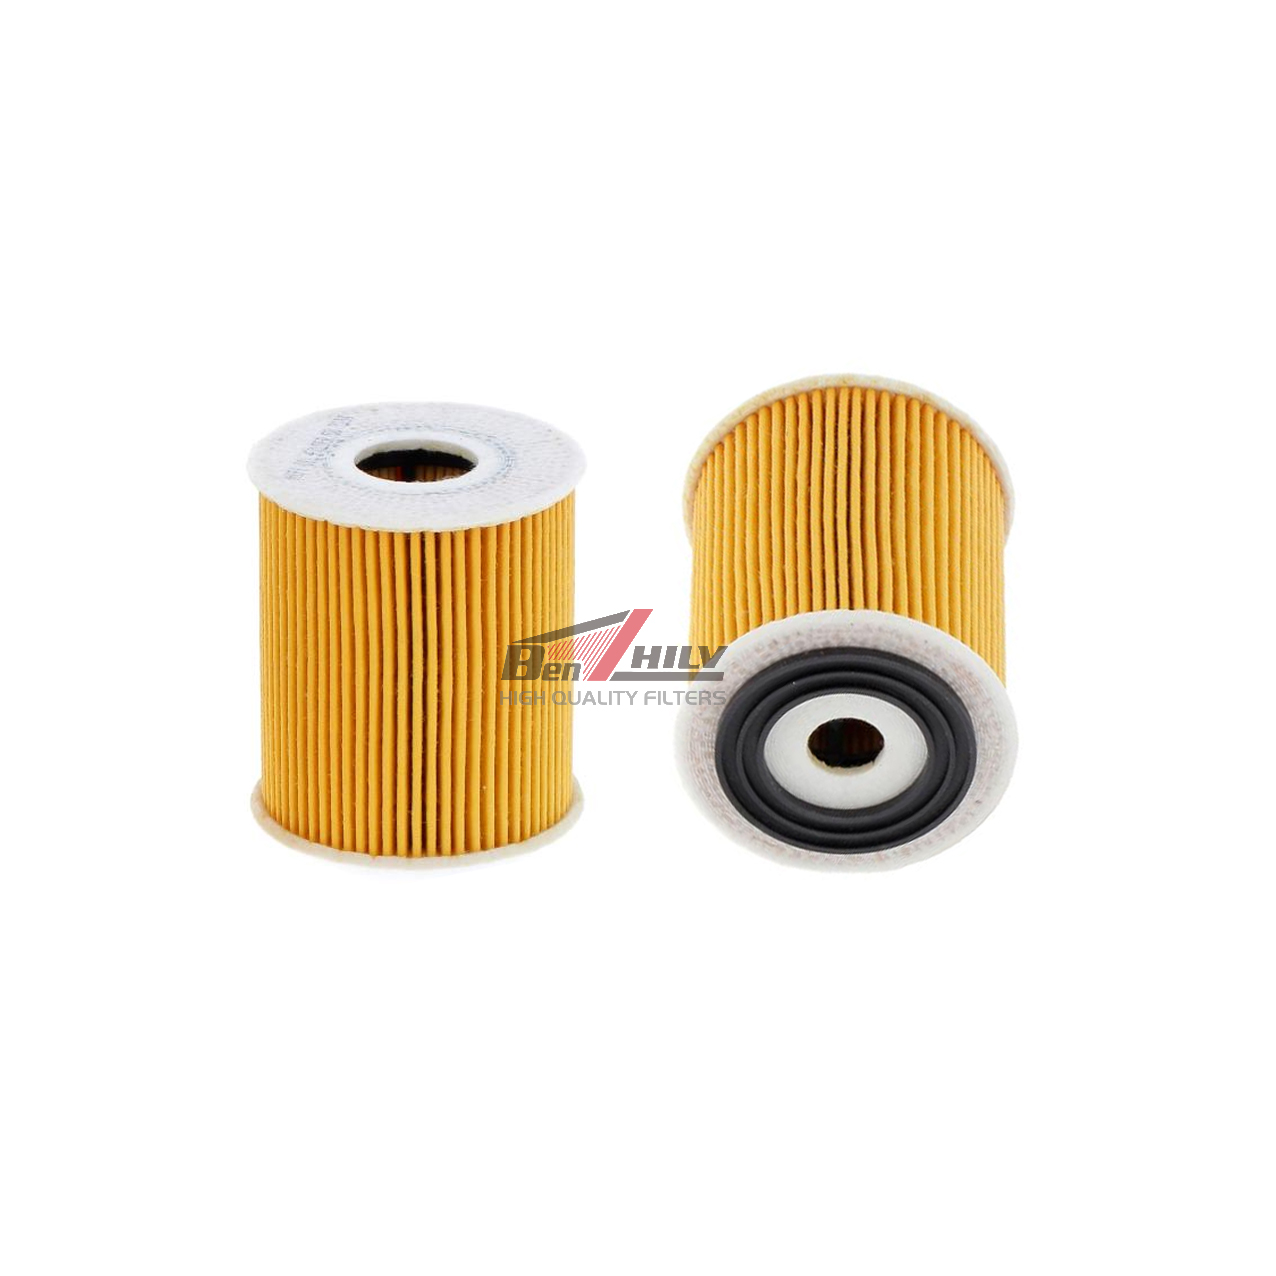 11427509208 Lubricate the oil filter element